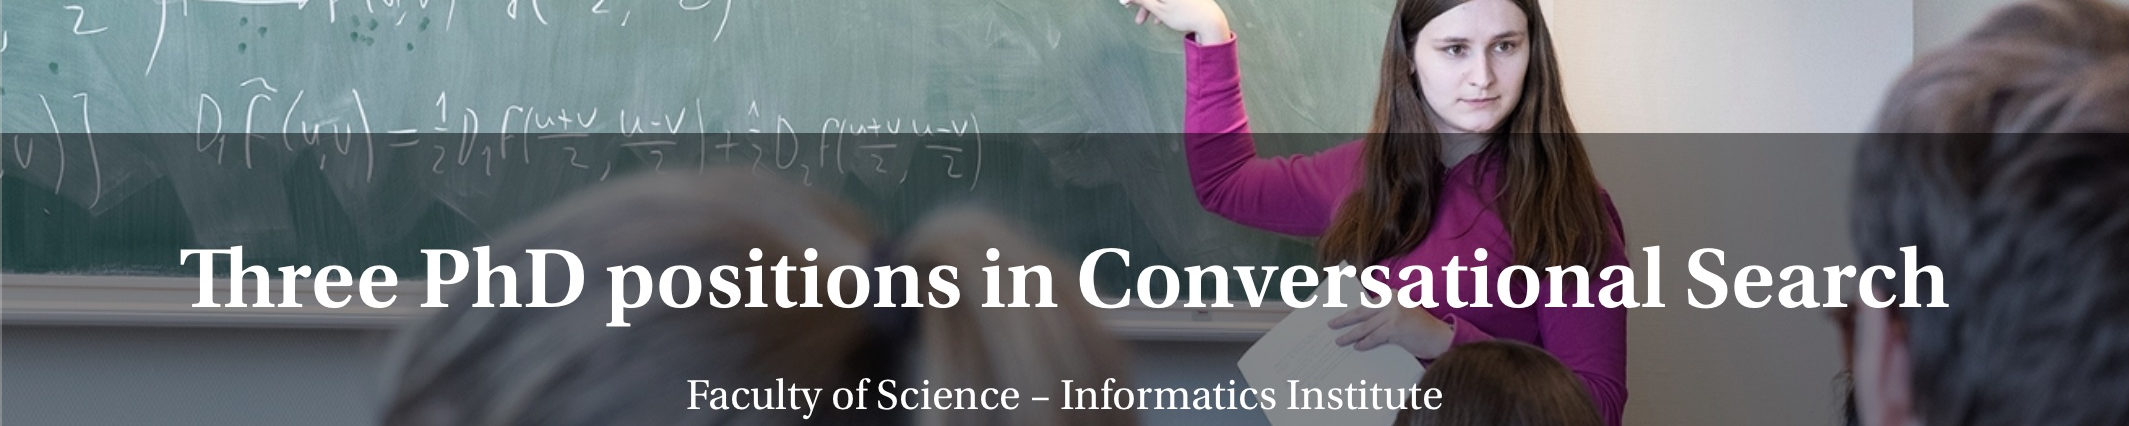 Three PhD positions in Conversational Search